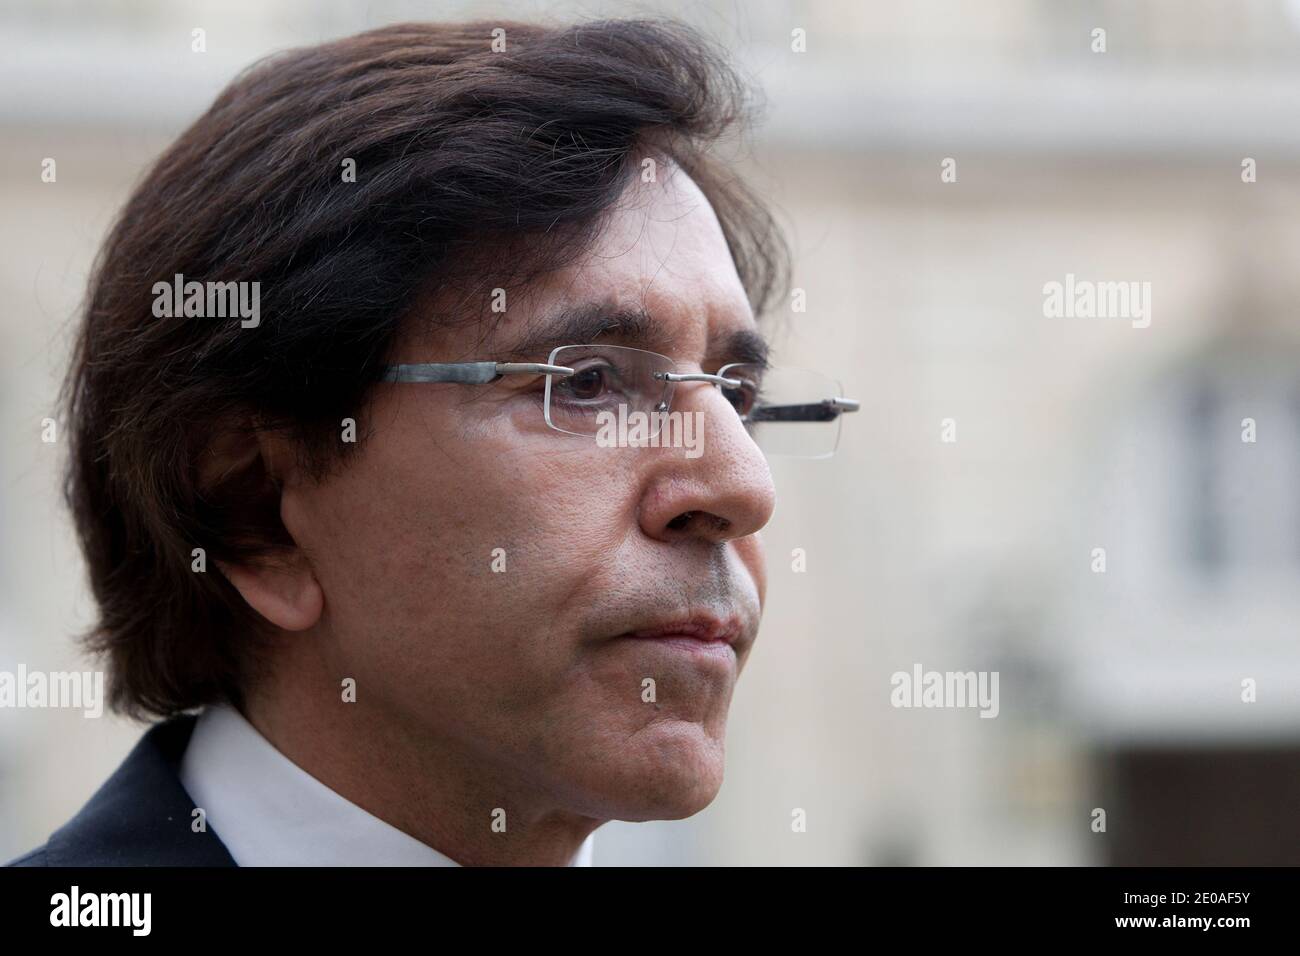 Belgium Prime Minister Elio Di Rupo answers to medias after a meeting with French President Nicolas Sarkozy at the Elysee Palace, in Paris, France on February 24, 2012. Photo by Stephane Lemouton/ABACAPRESS.COM. Stock Photo